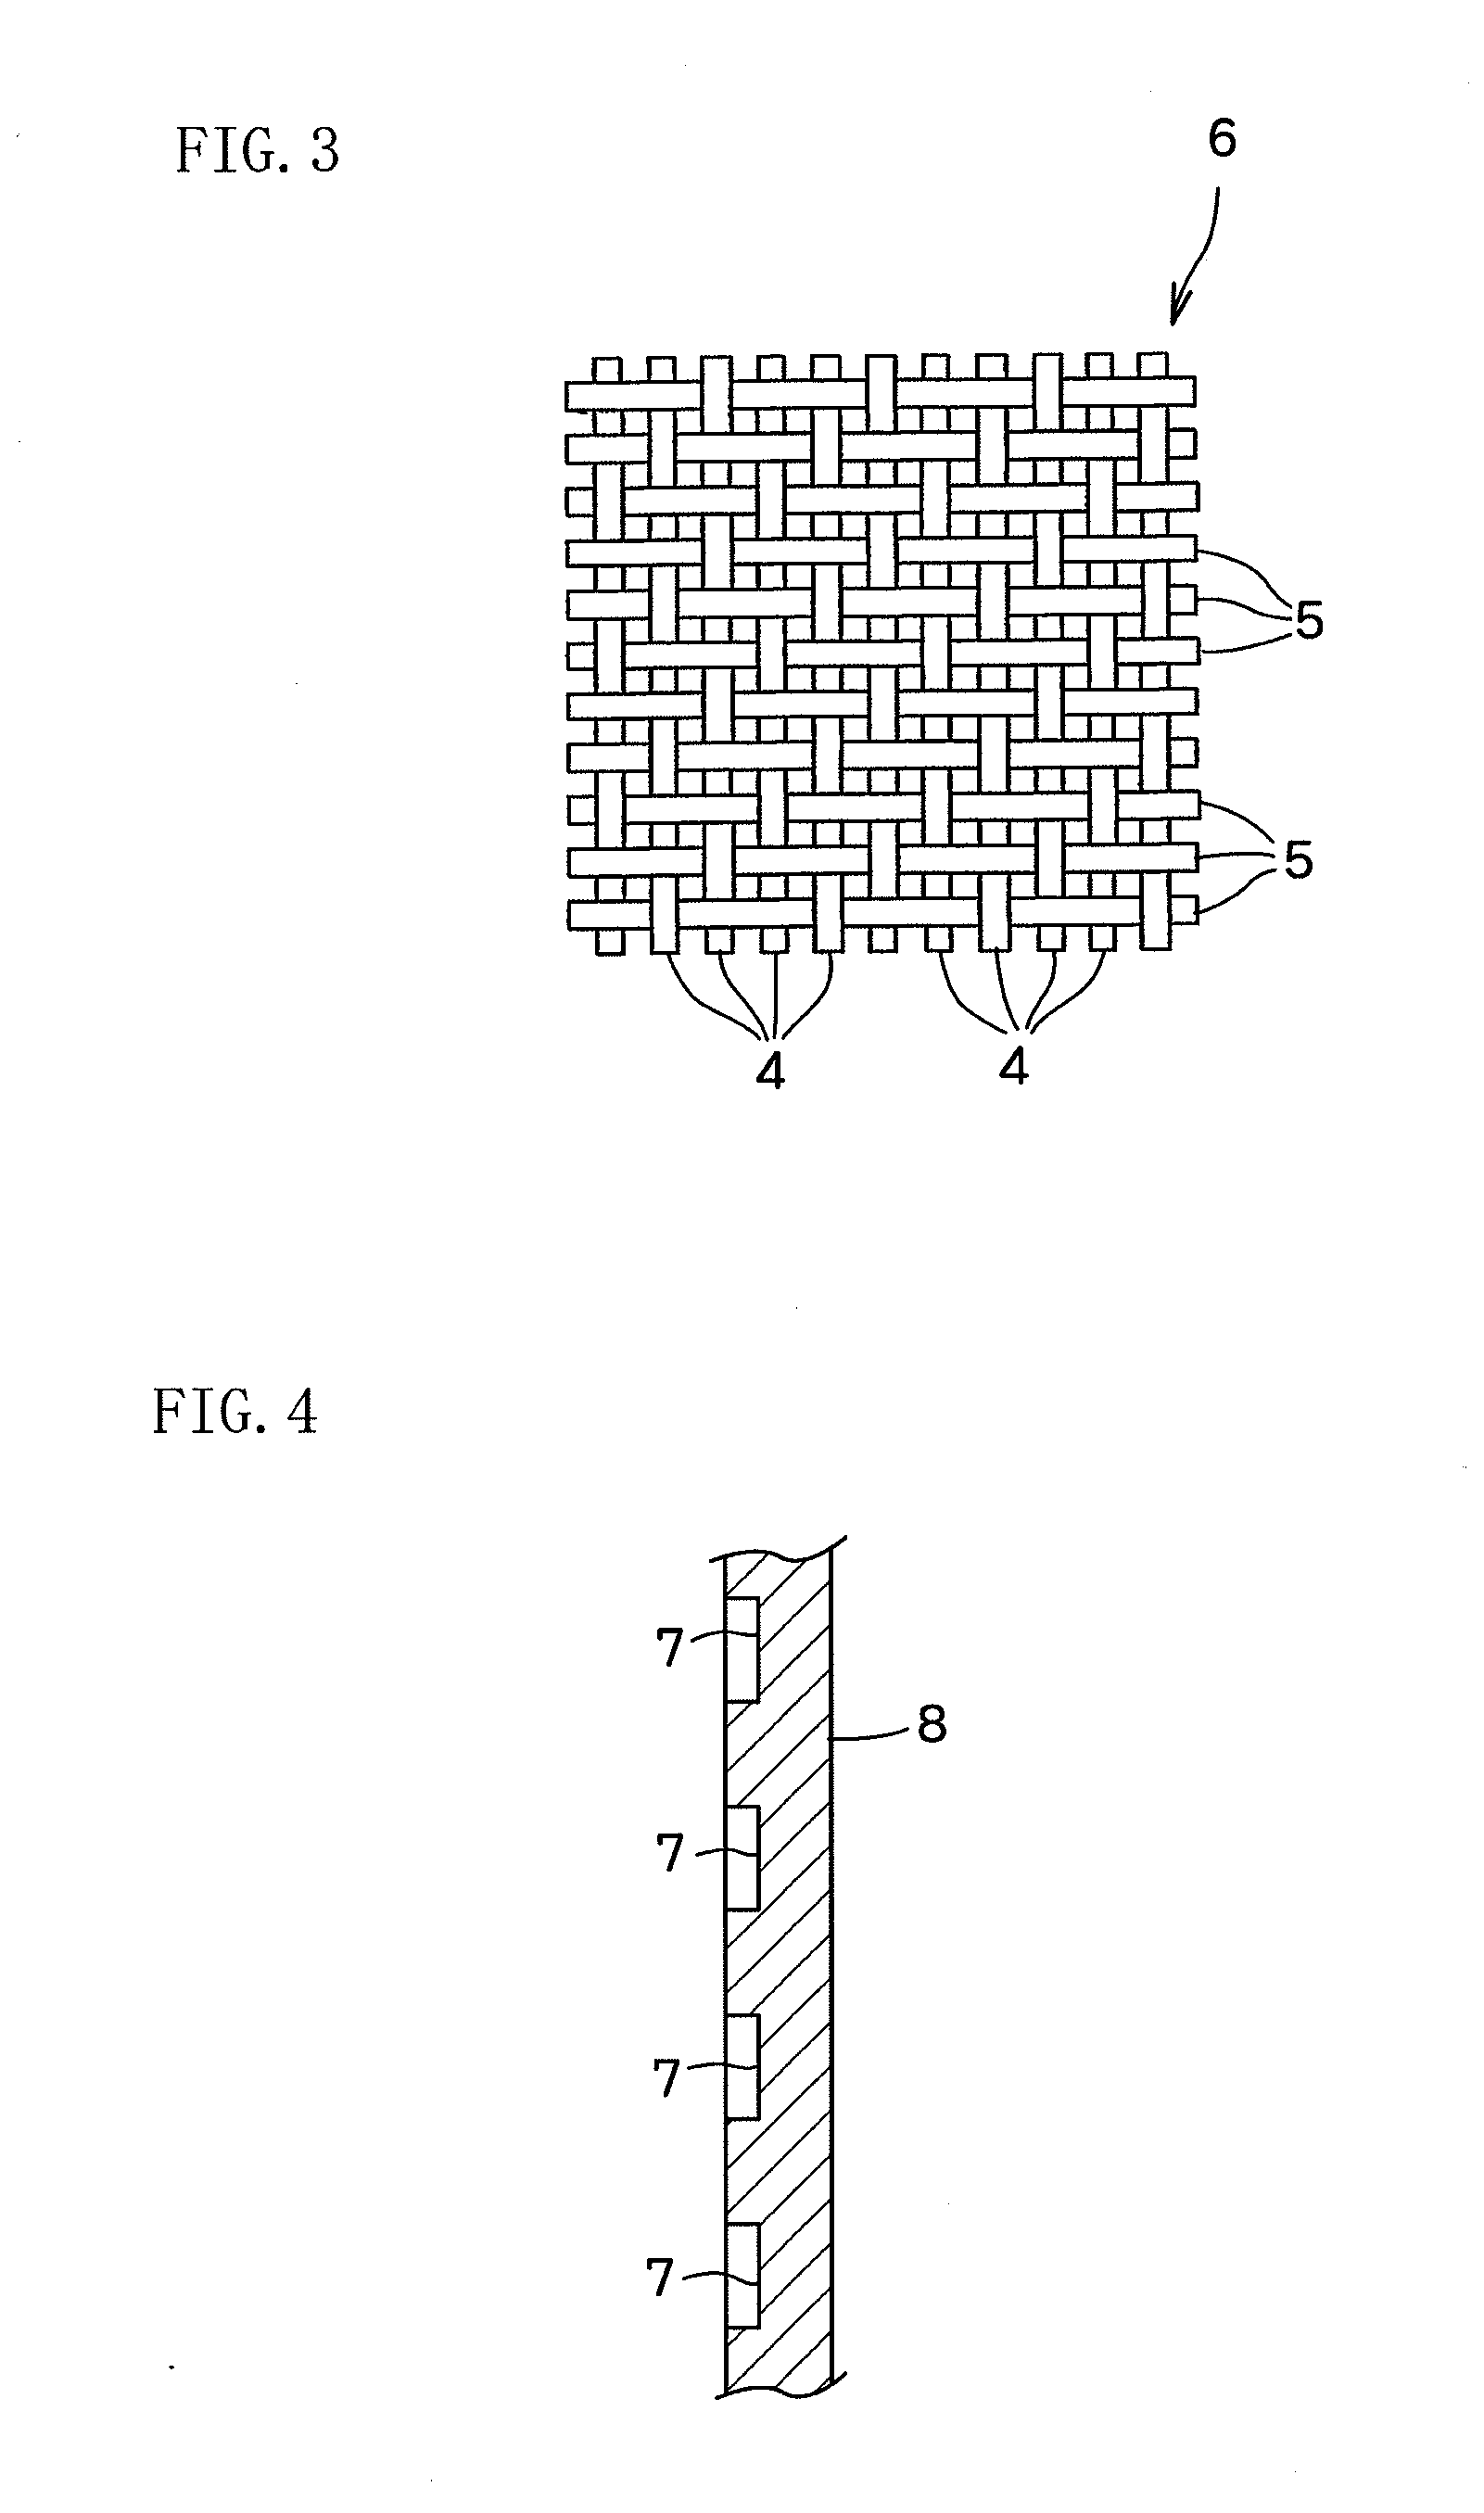 Electrolytic cell for producing chlorine - sodium hydroxide and method of producing chlorine - sodium hydroxide